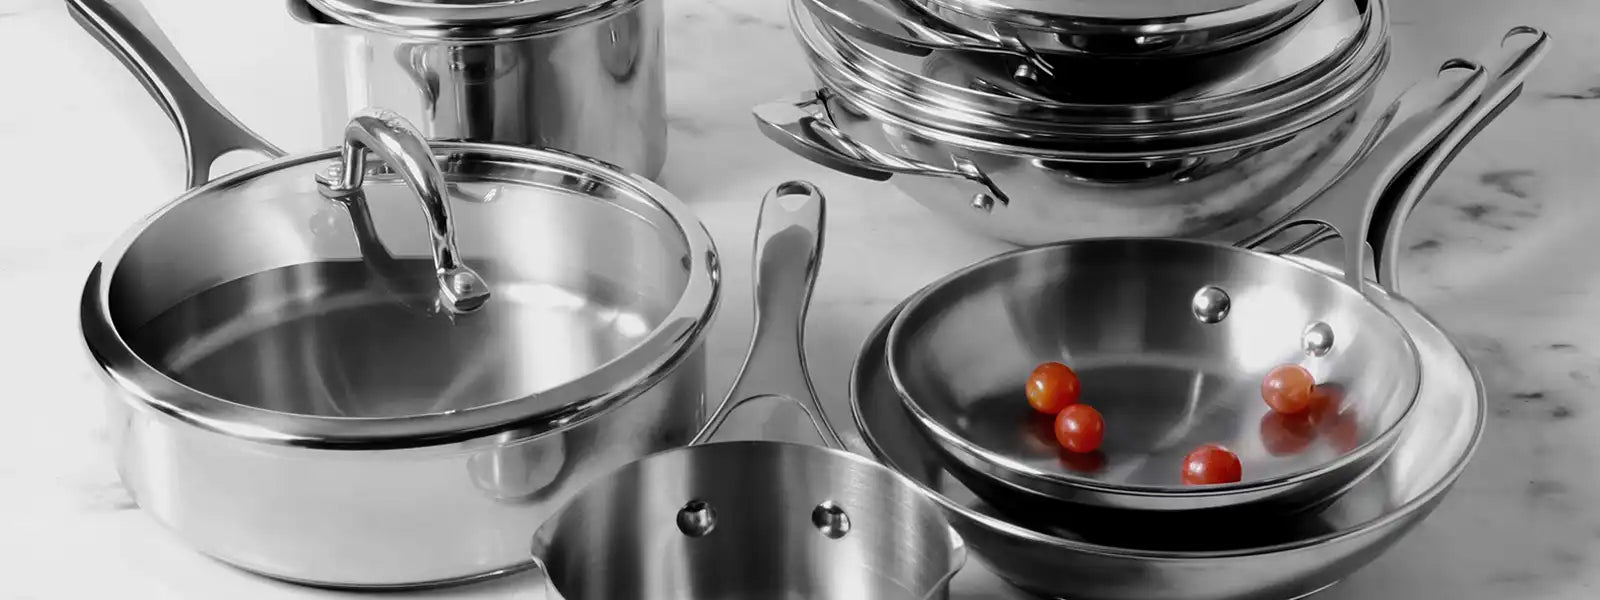 What is the best steel for our cookware?